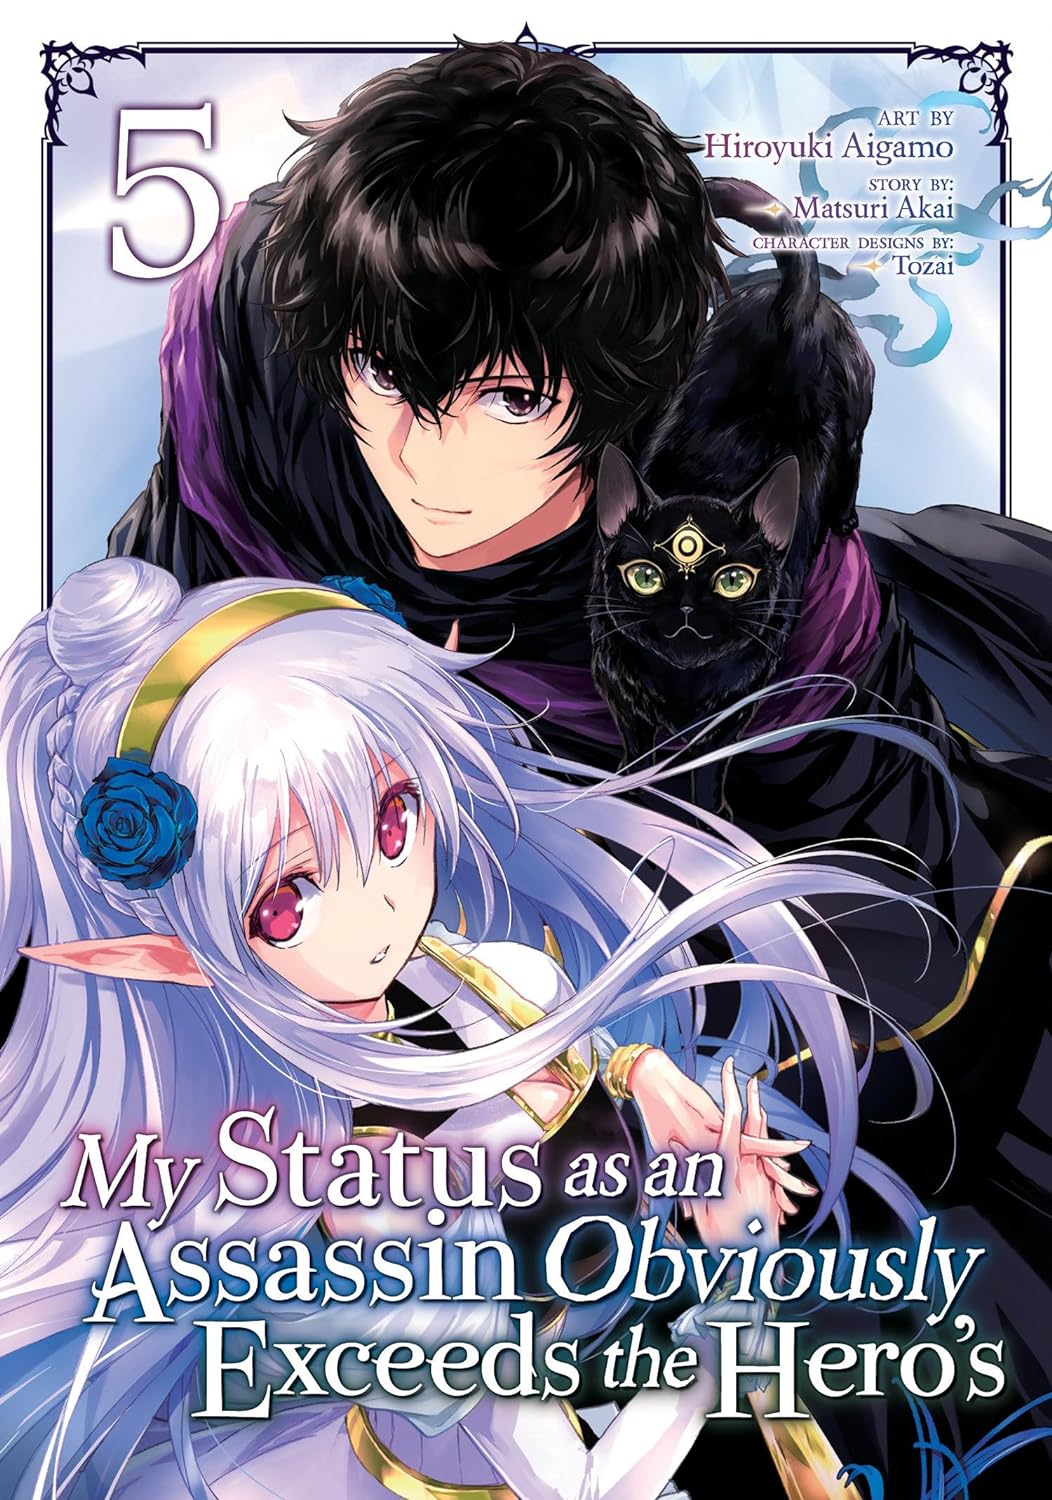 My Status as an Assassin Obviously Exceeds the Hero’s (Manga) Vol. 05